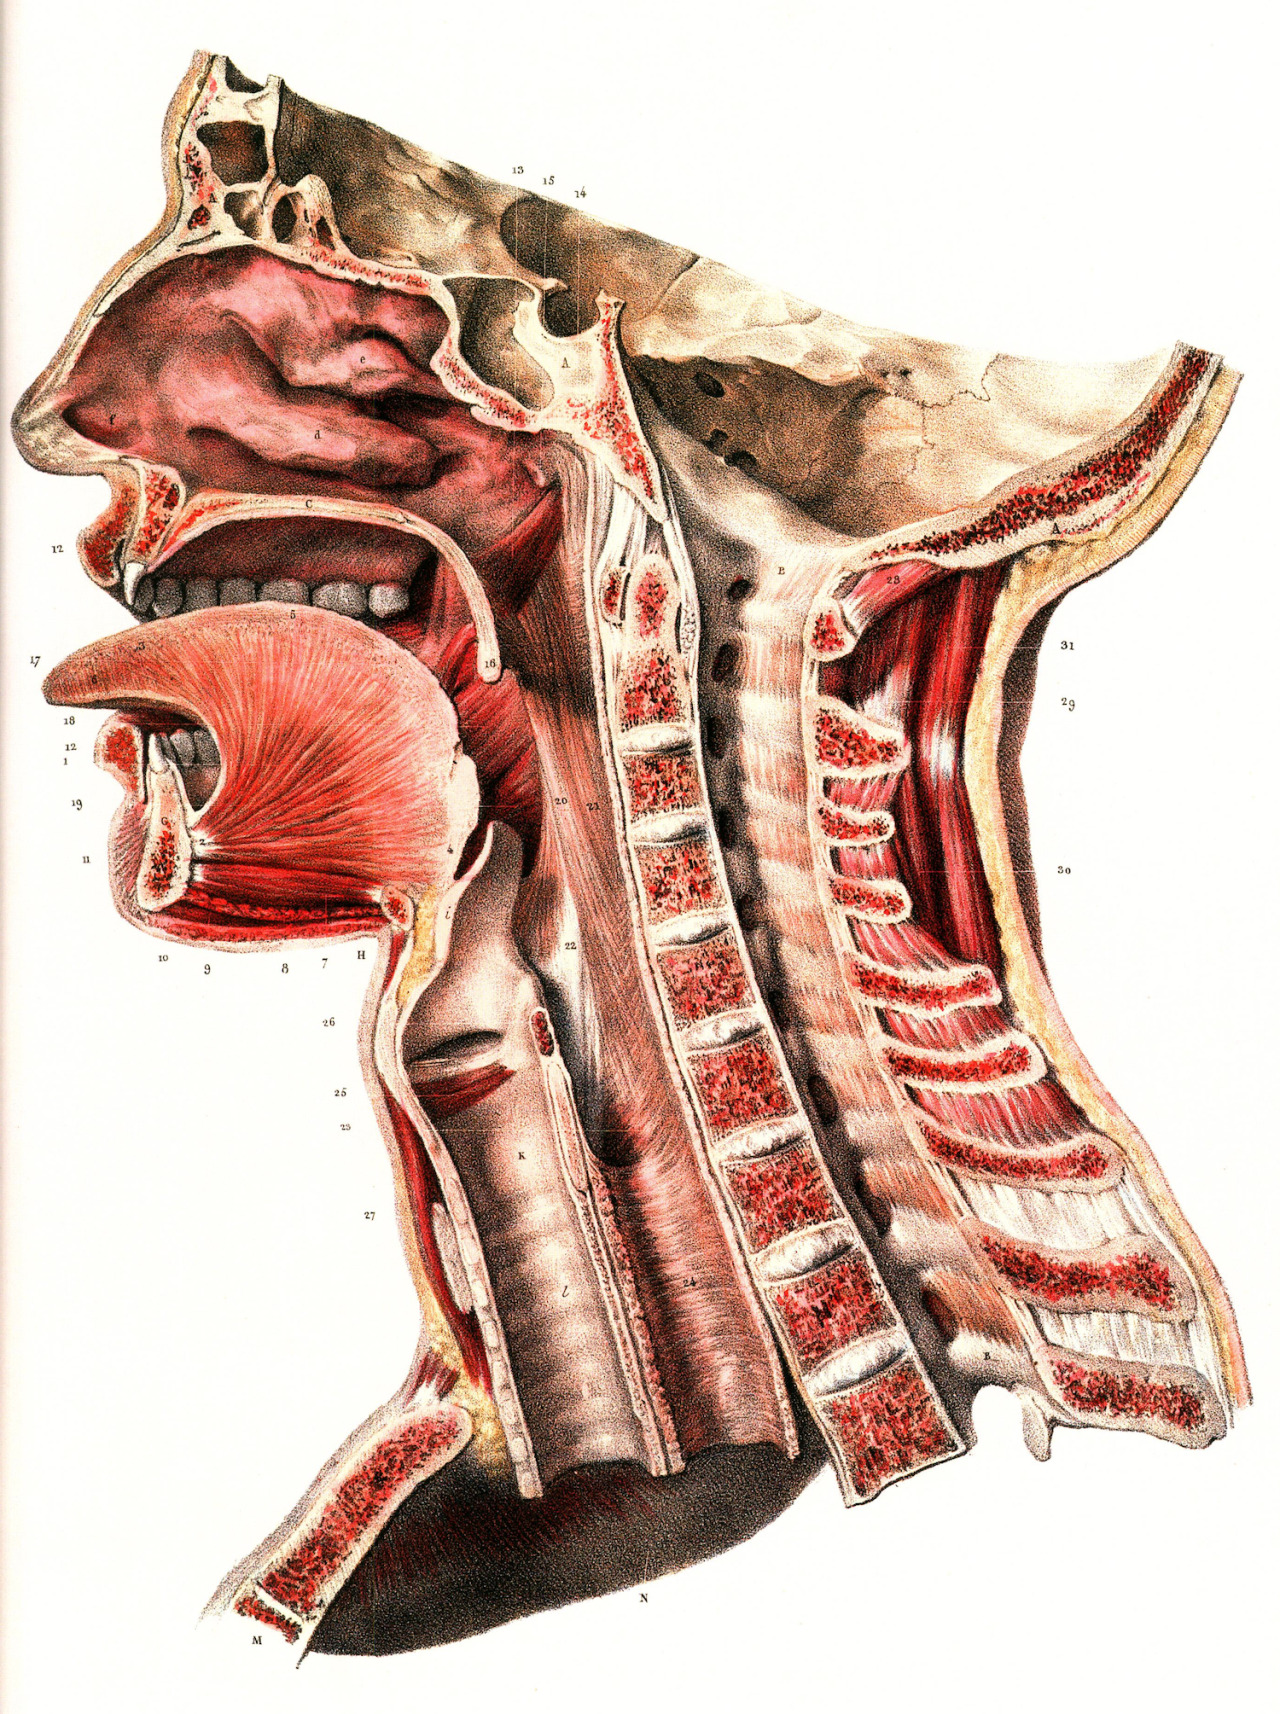 brettkingery:   Selections from the “Atlas of Human Anatomy and Surgery” by Jean-Marie